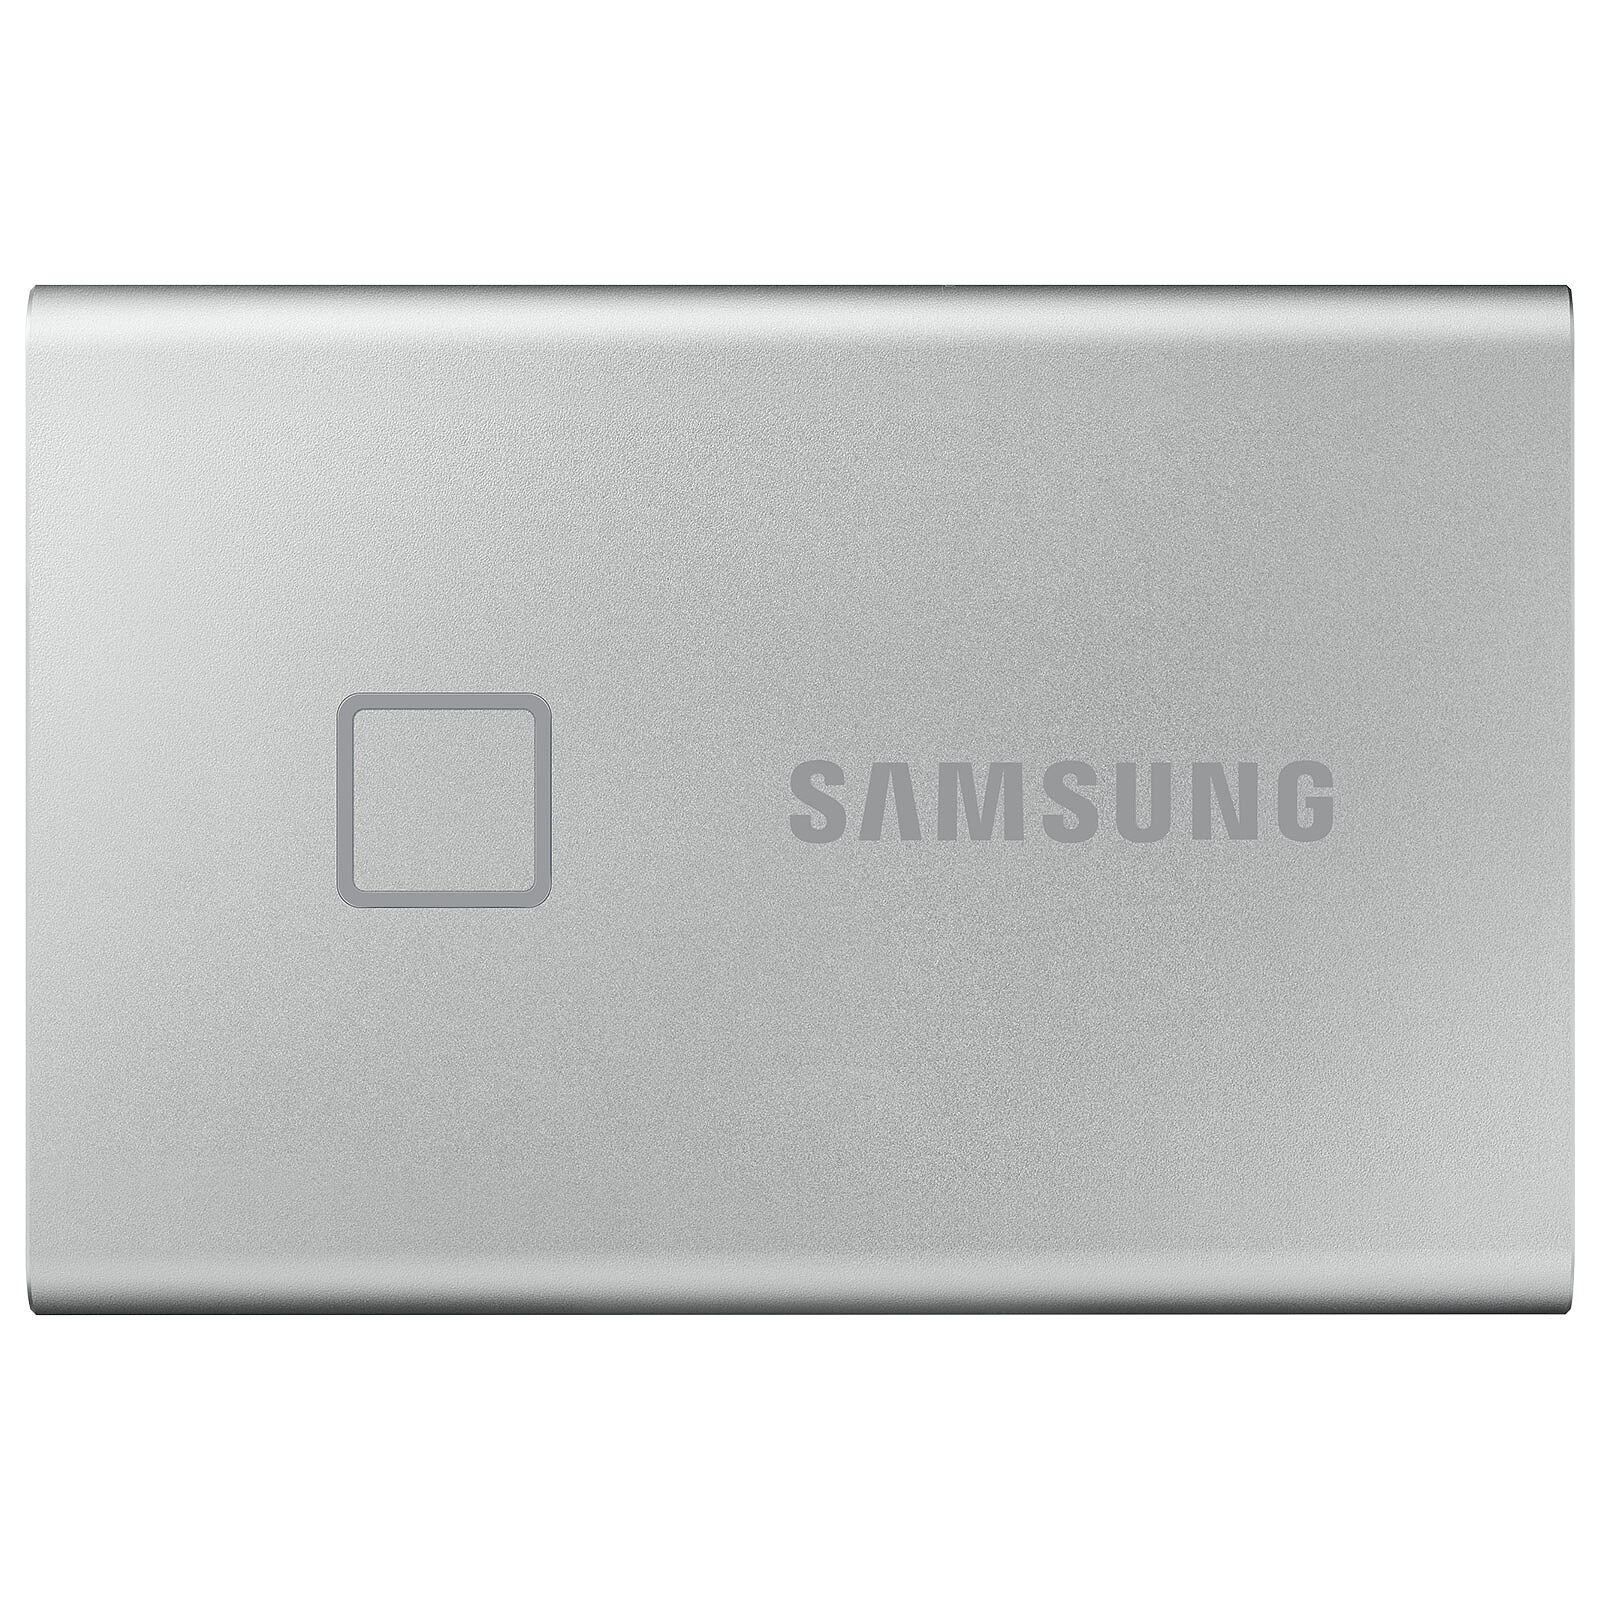 Samsung Laptop SSD T7 Touch 2Tb Silver - External hard drive - LDLC 3-year  warranty